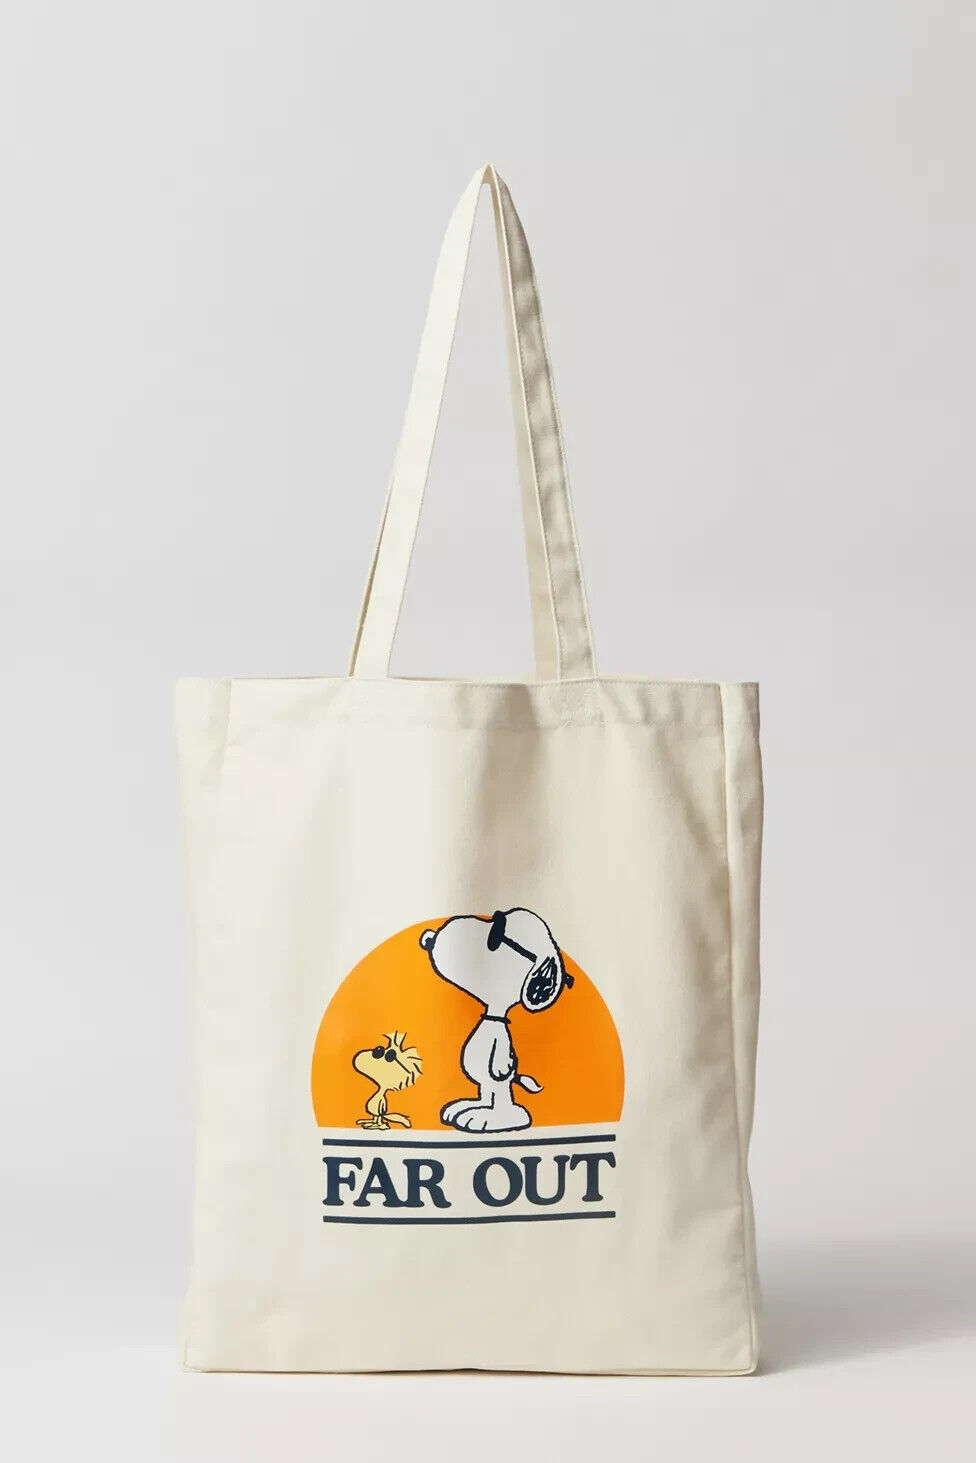 Peanuts Snoopy Far Out Tote Bag White Urban Outfitters